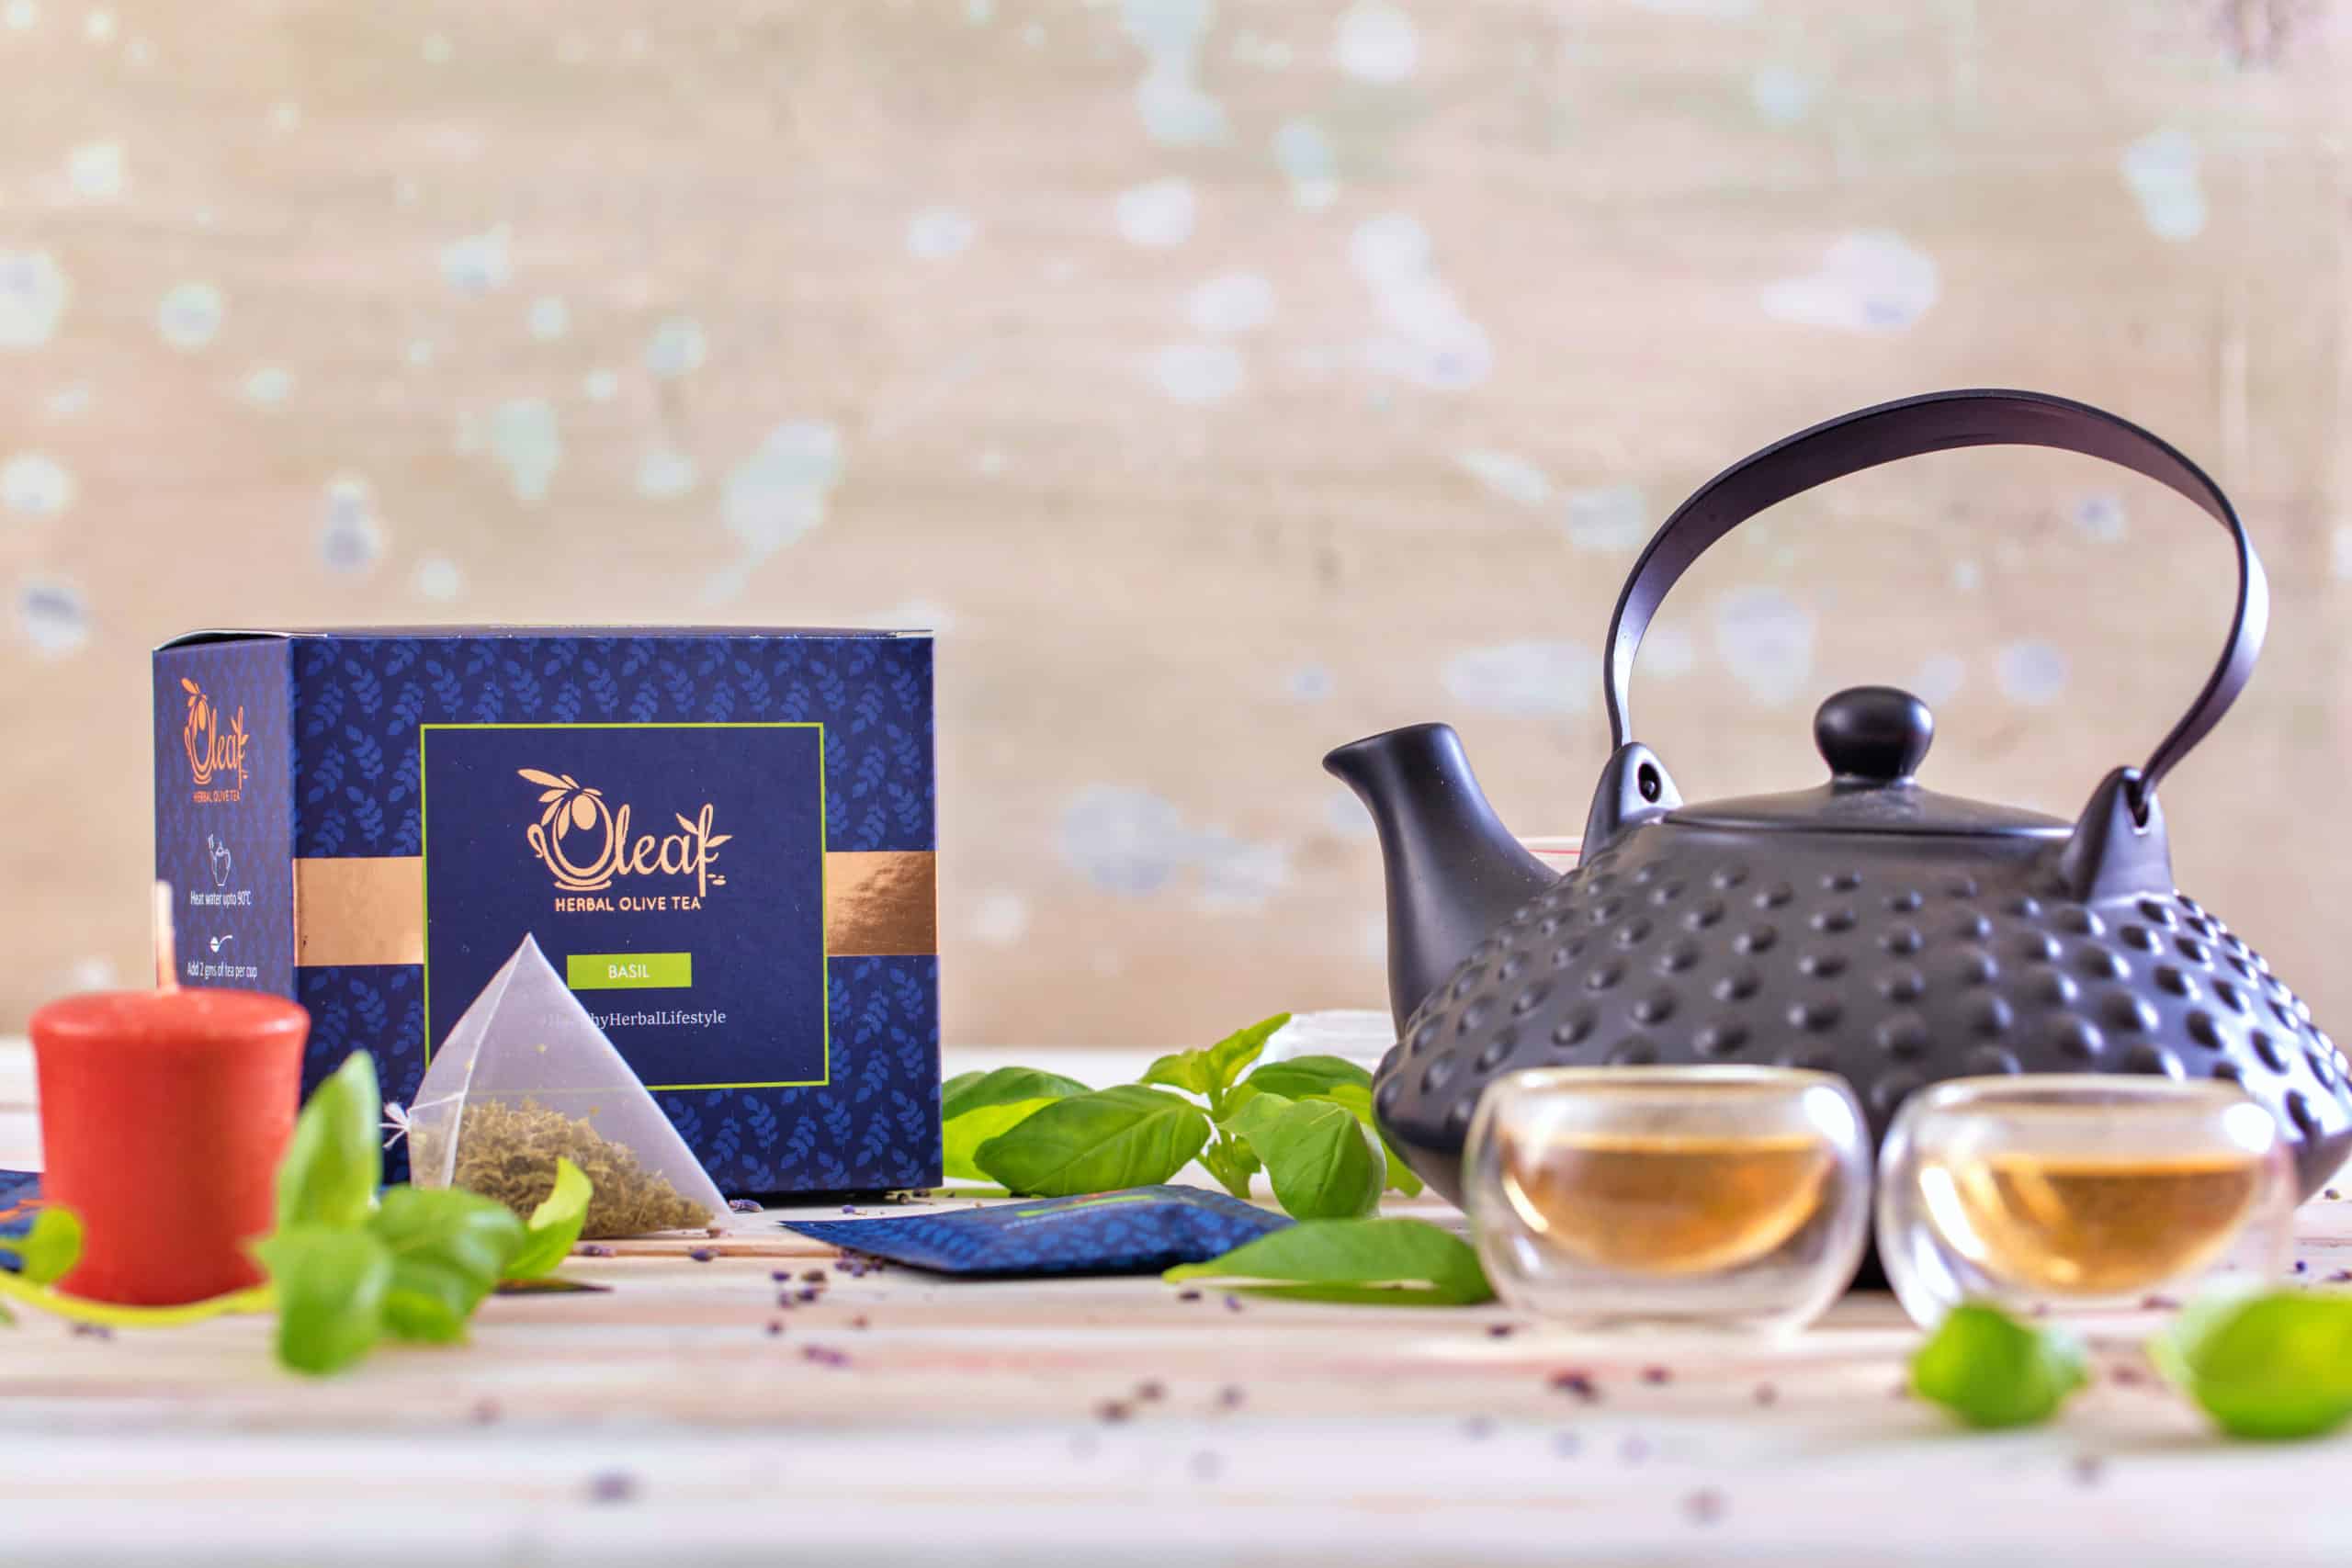 Oleaf olive tea 100g box with kettle and cup of tea